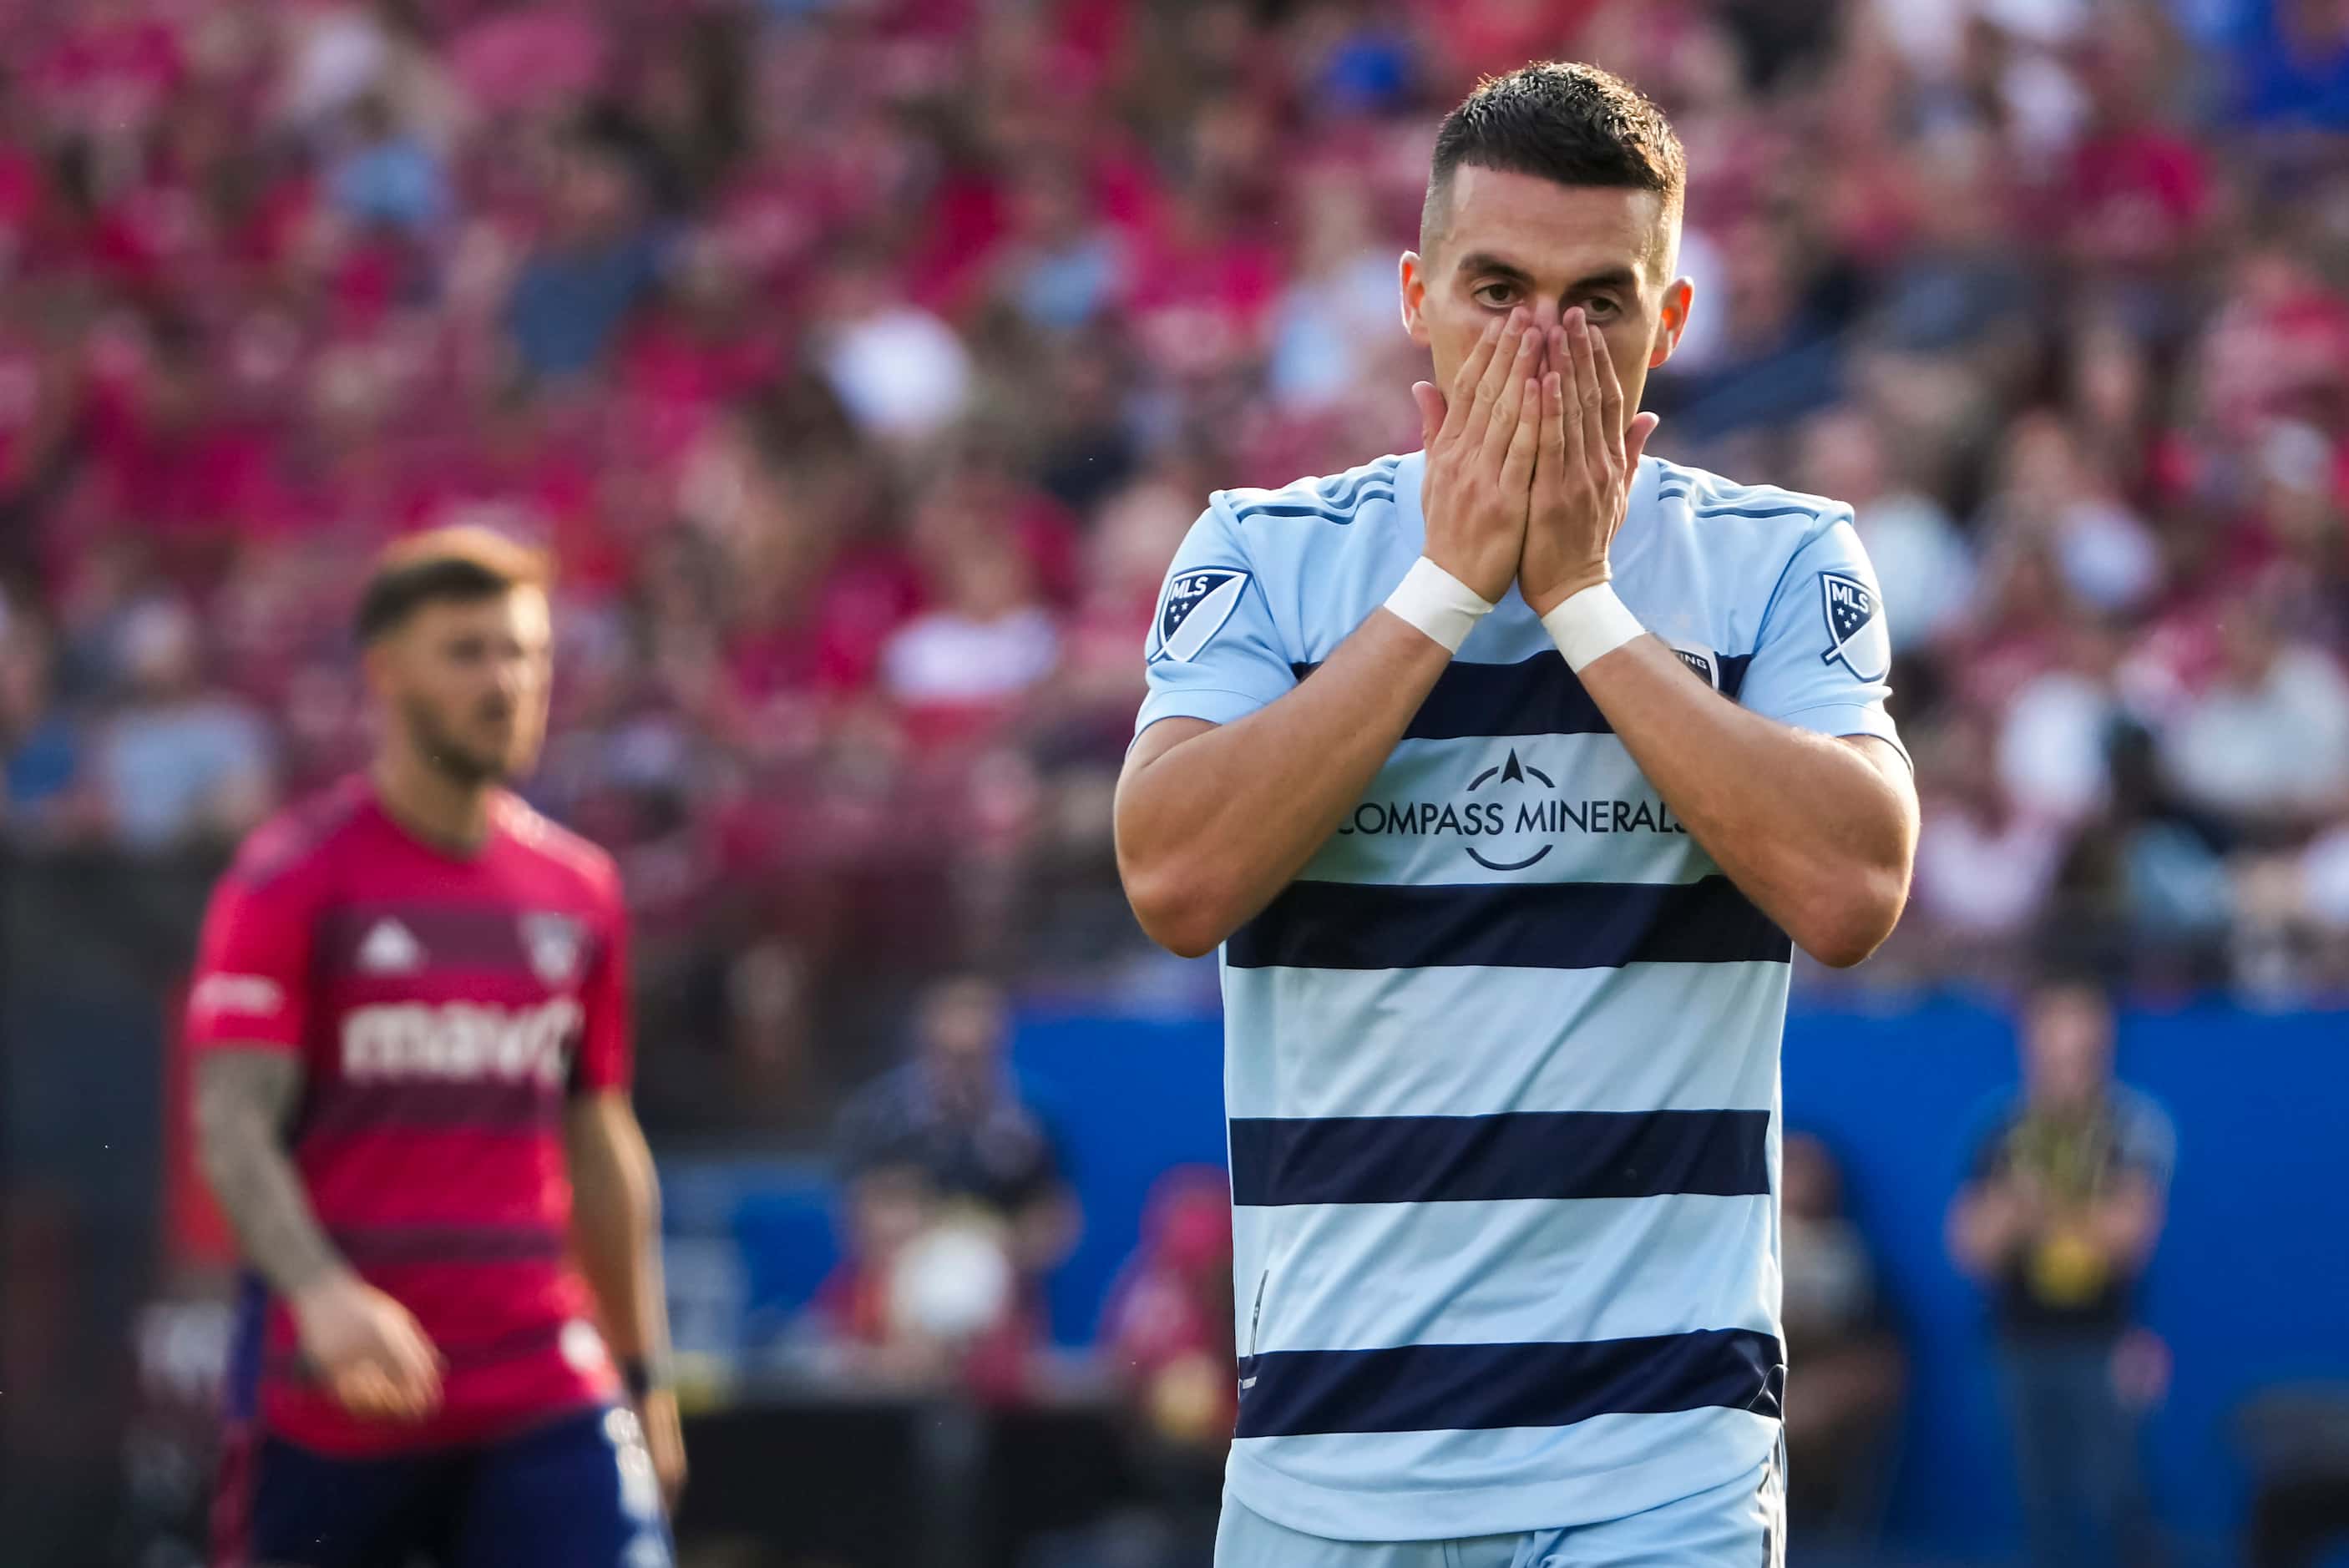 Sporting Kansas City midfielder Erik Thommy (26) reacts after missing a shot during the...